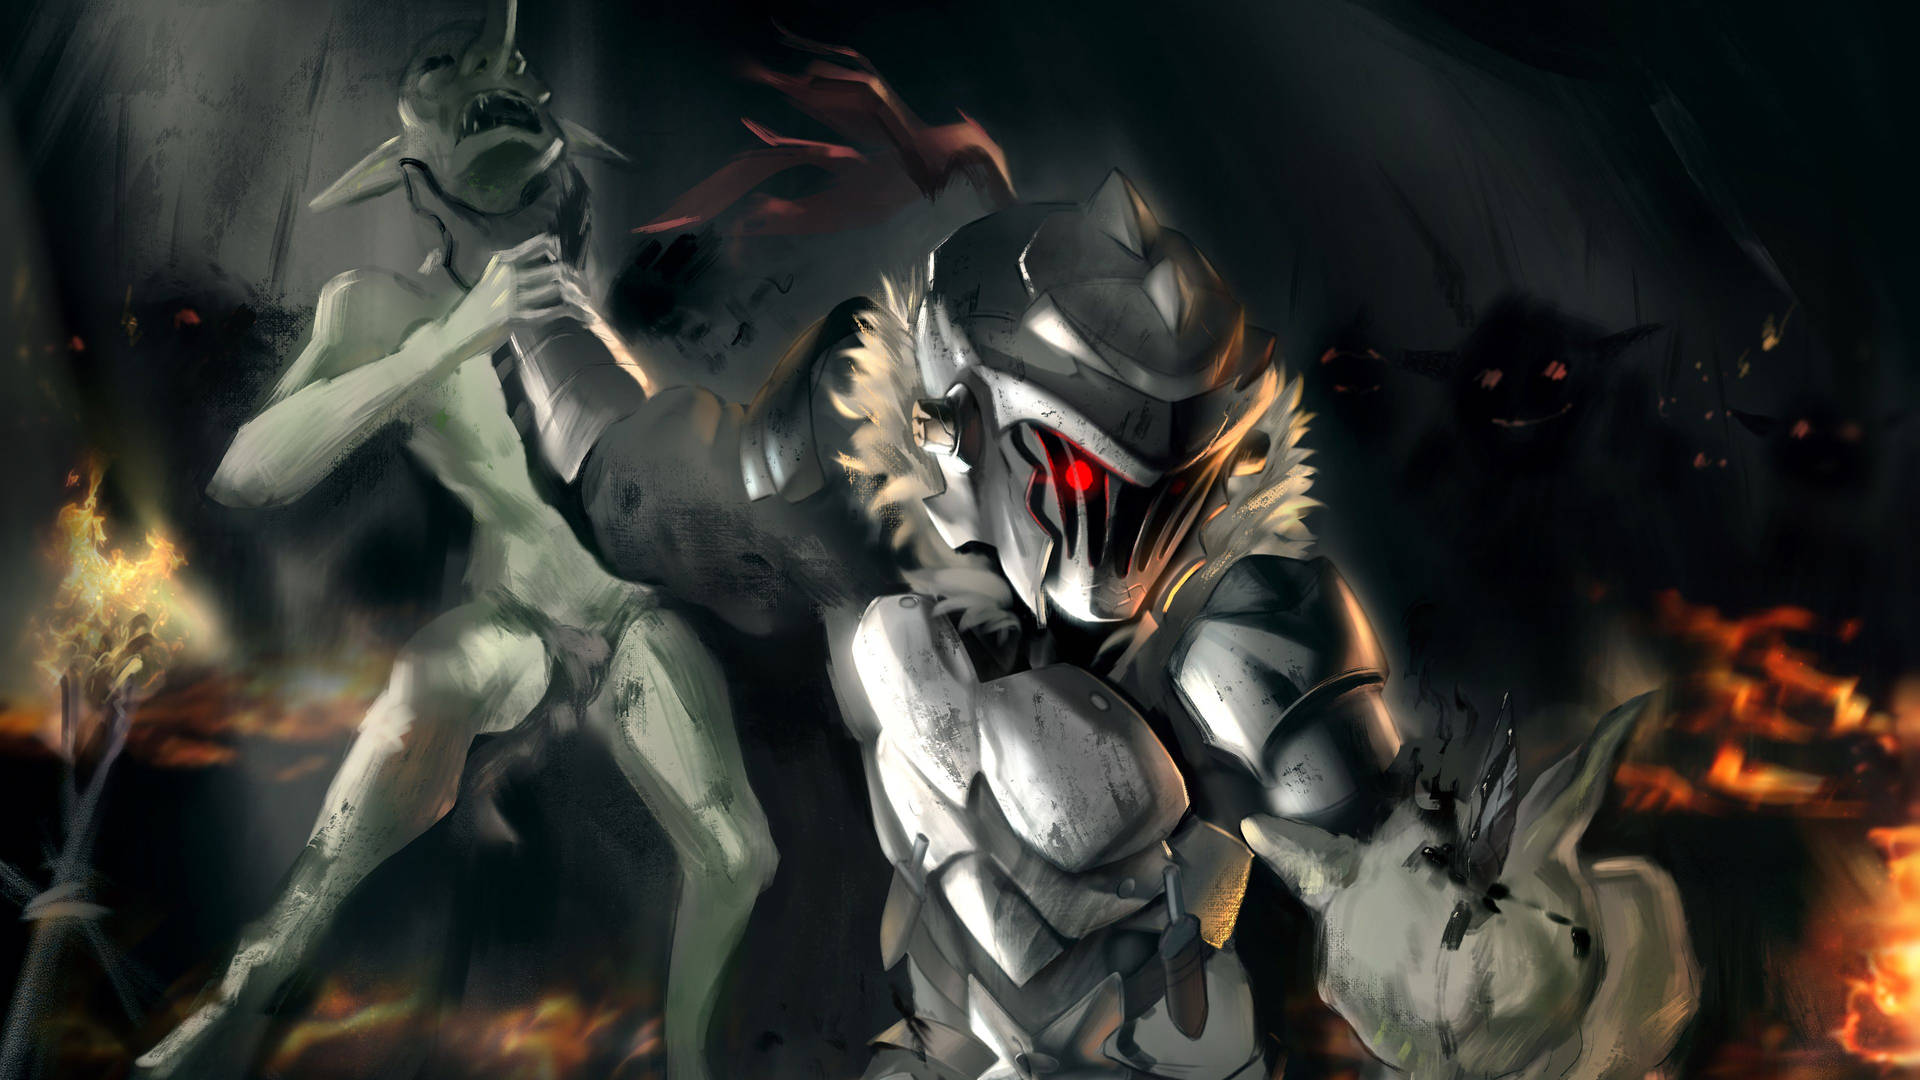 This Goblin Slayer arc dives into a world of peril and darkness Wallpaper